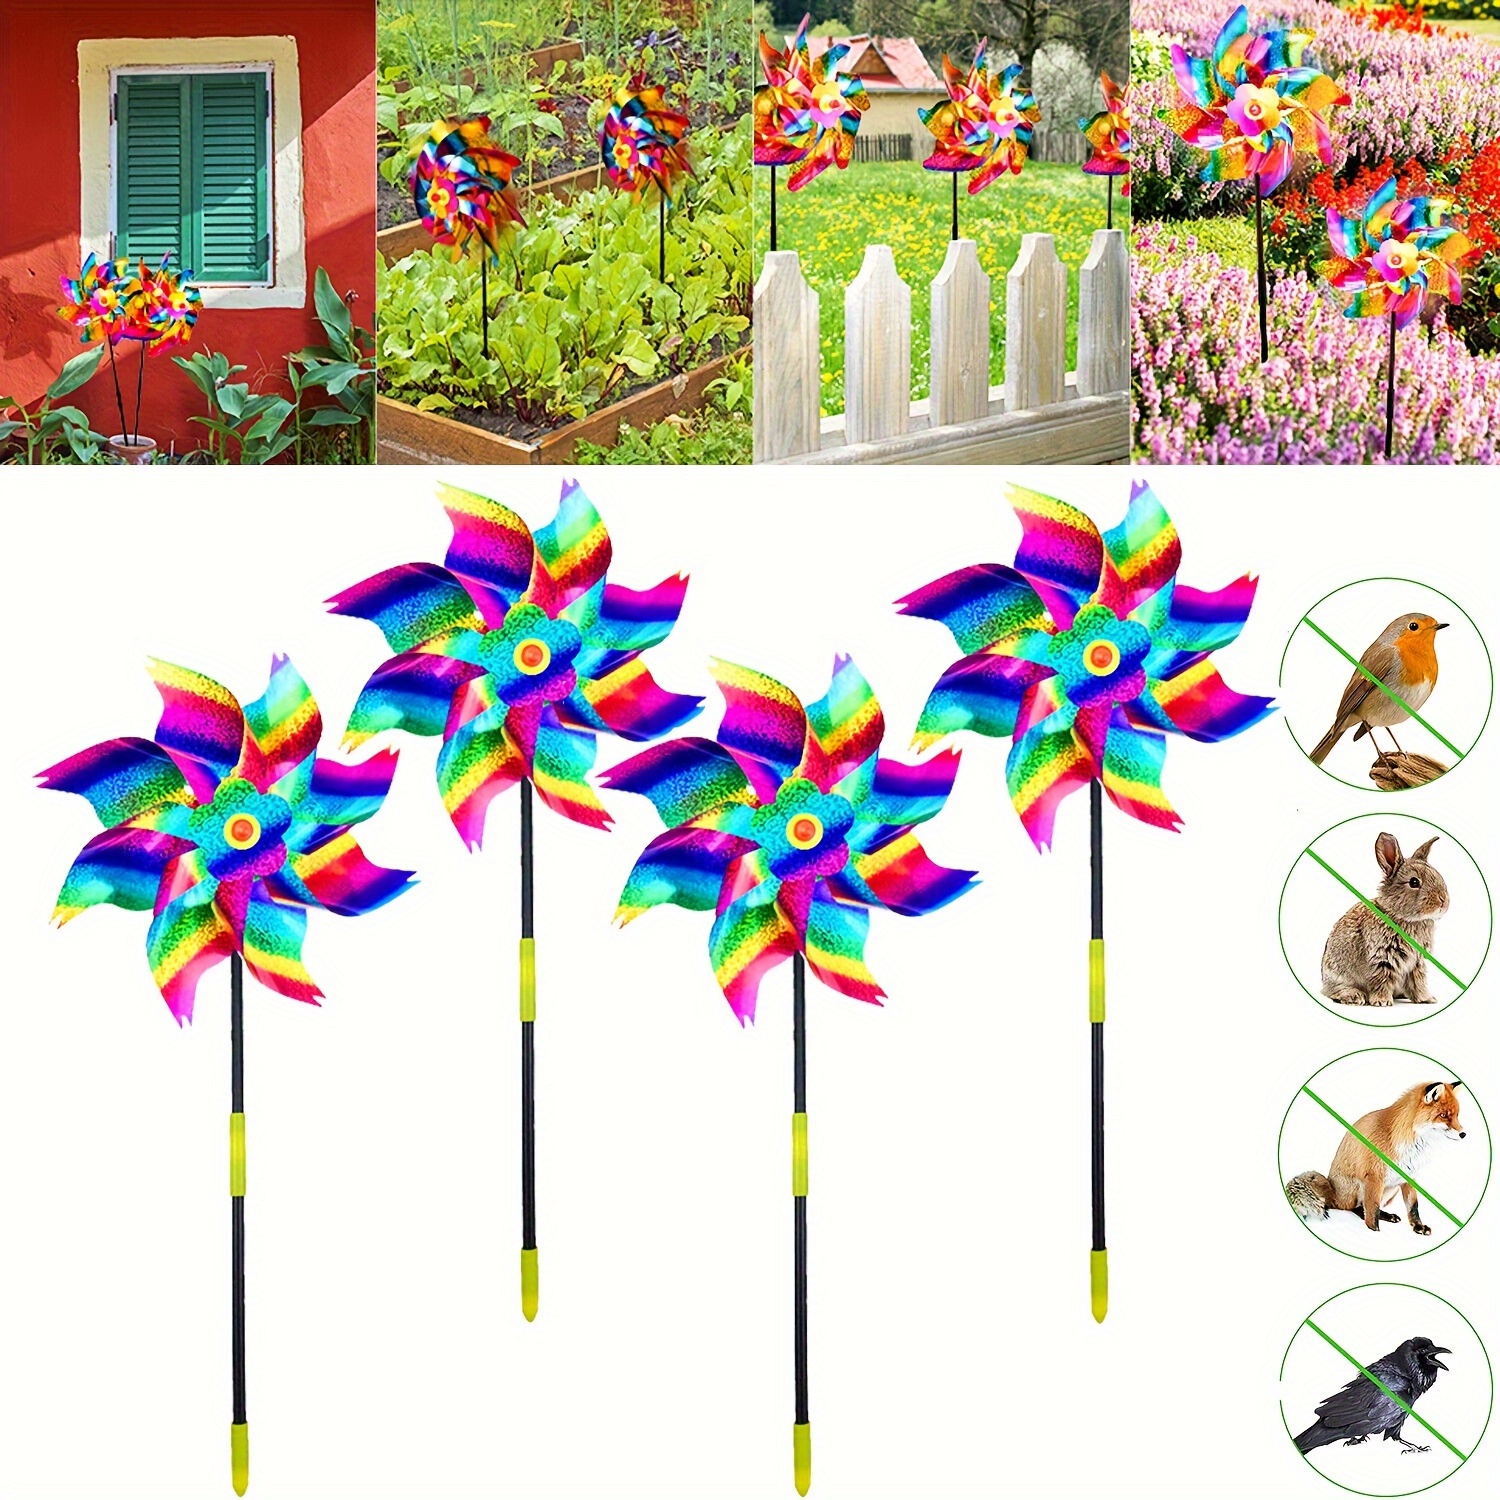 

5 Packs, Reflective Pinwheels With Stakes, Extra Sparkly Pinwheel For Garden Decor, Bird Devices Deterrent To Scare Birds Away From Yard Patio Farm